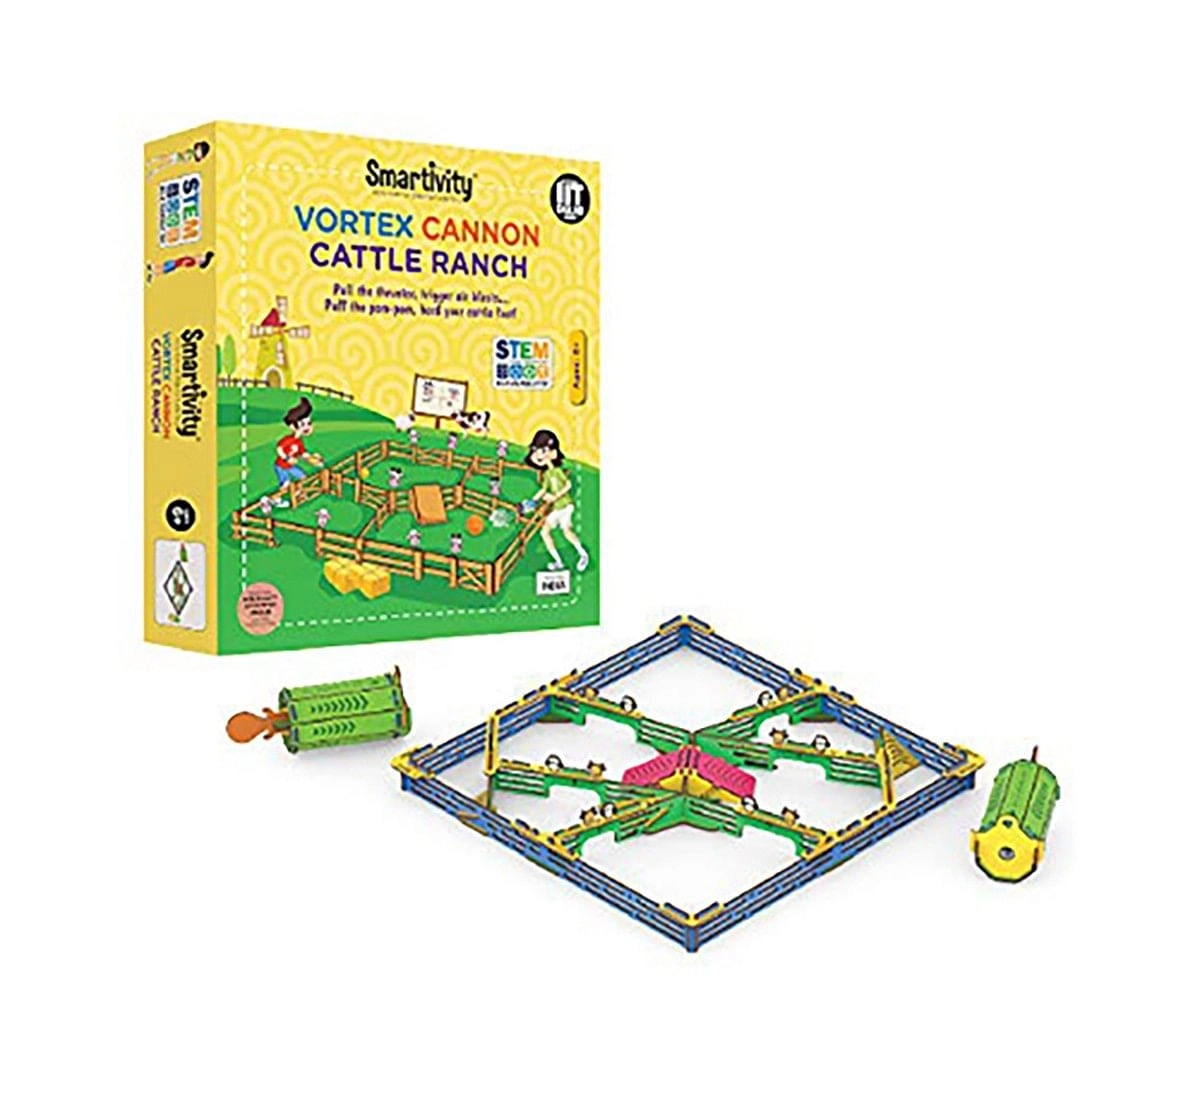 Smartivity Vortex Cannon Cattle Ranch: Stem, Learning, Educational and Construction Activity Toy Gift for Kids age 6Y+ 